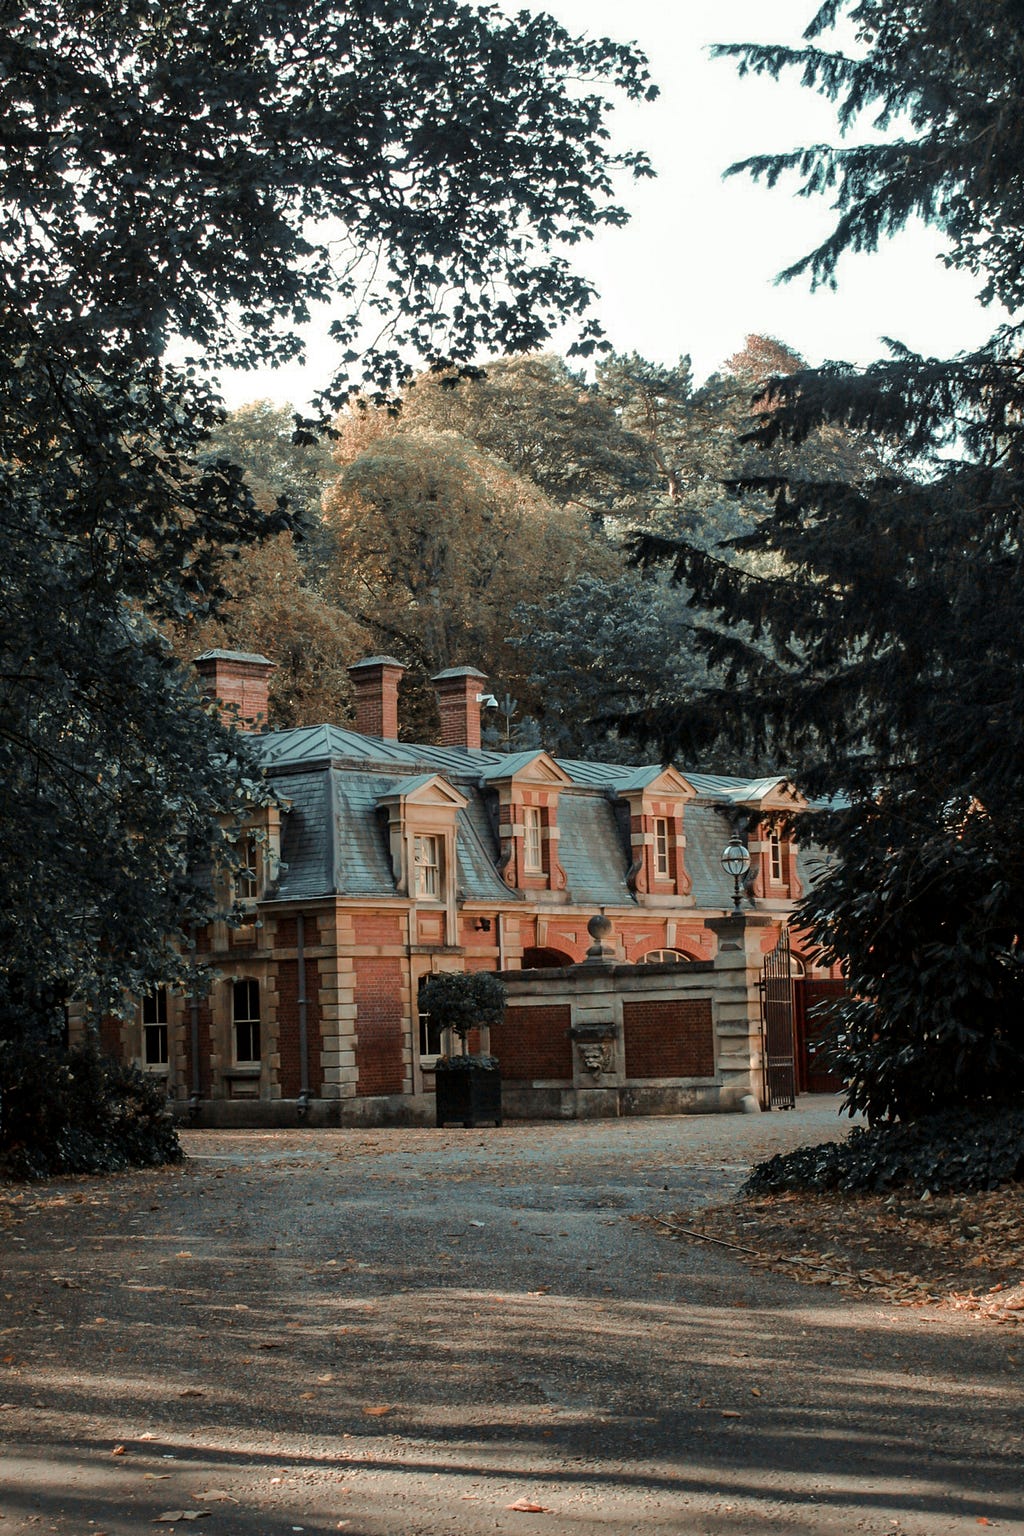 Manor house in the countryside surrounded by trees